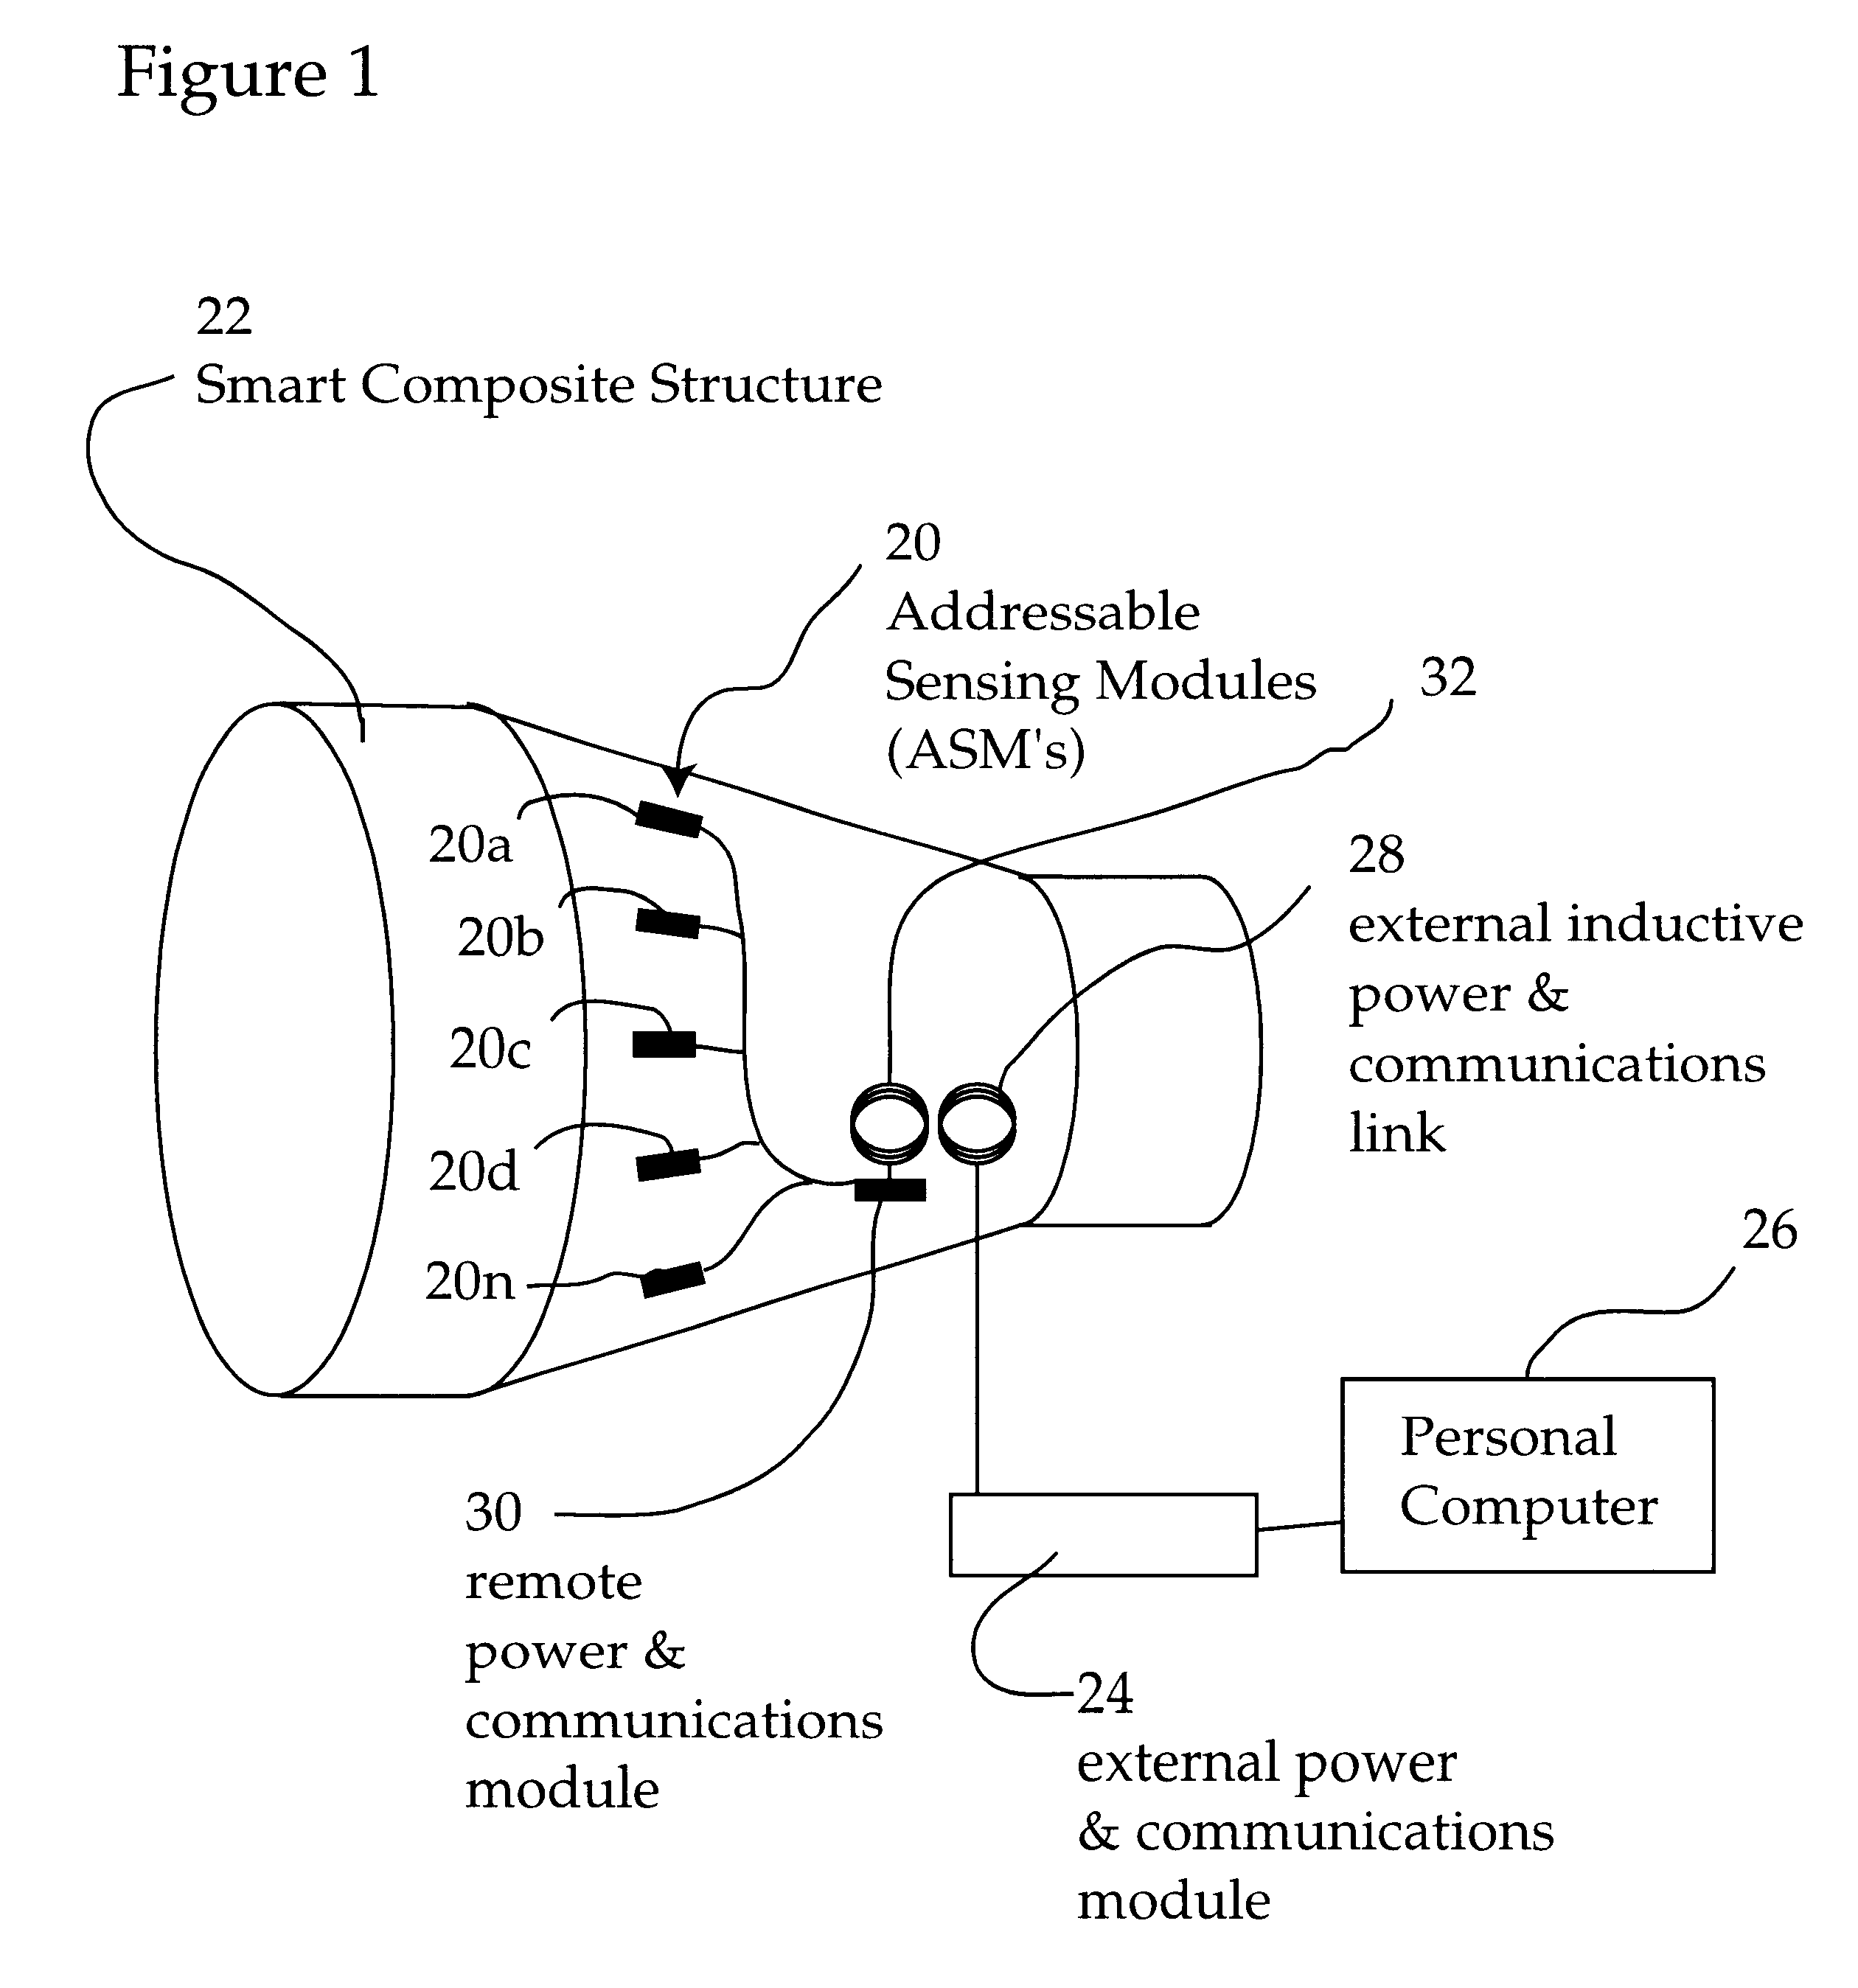 System for remote powering and communication with a network of addressable, multichannel sensing modules